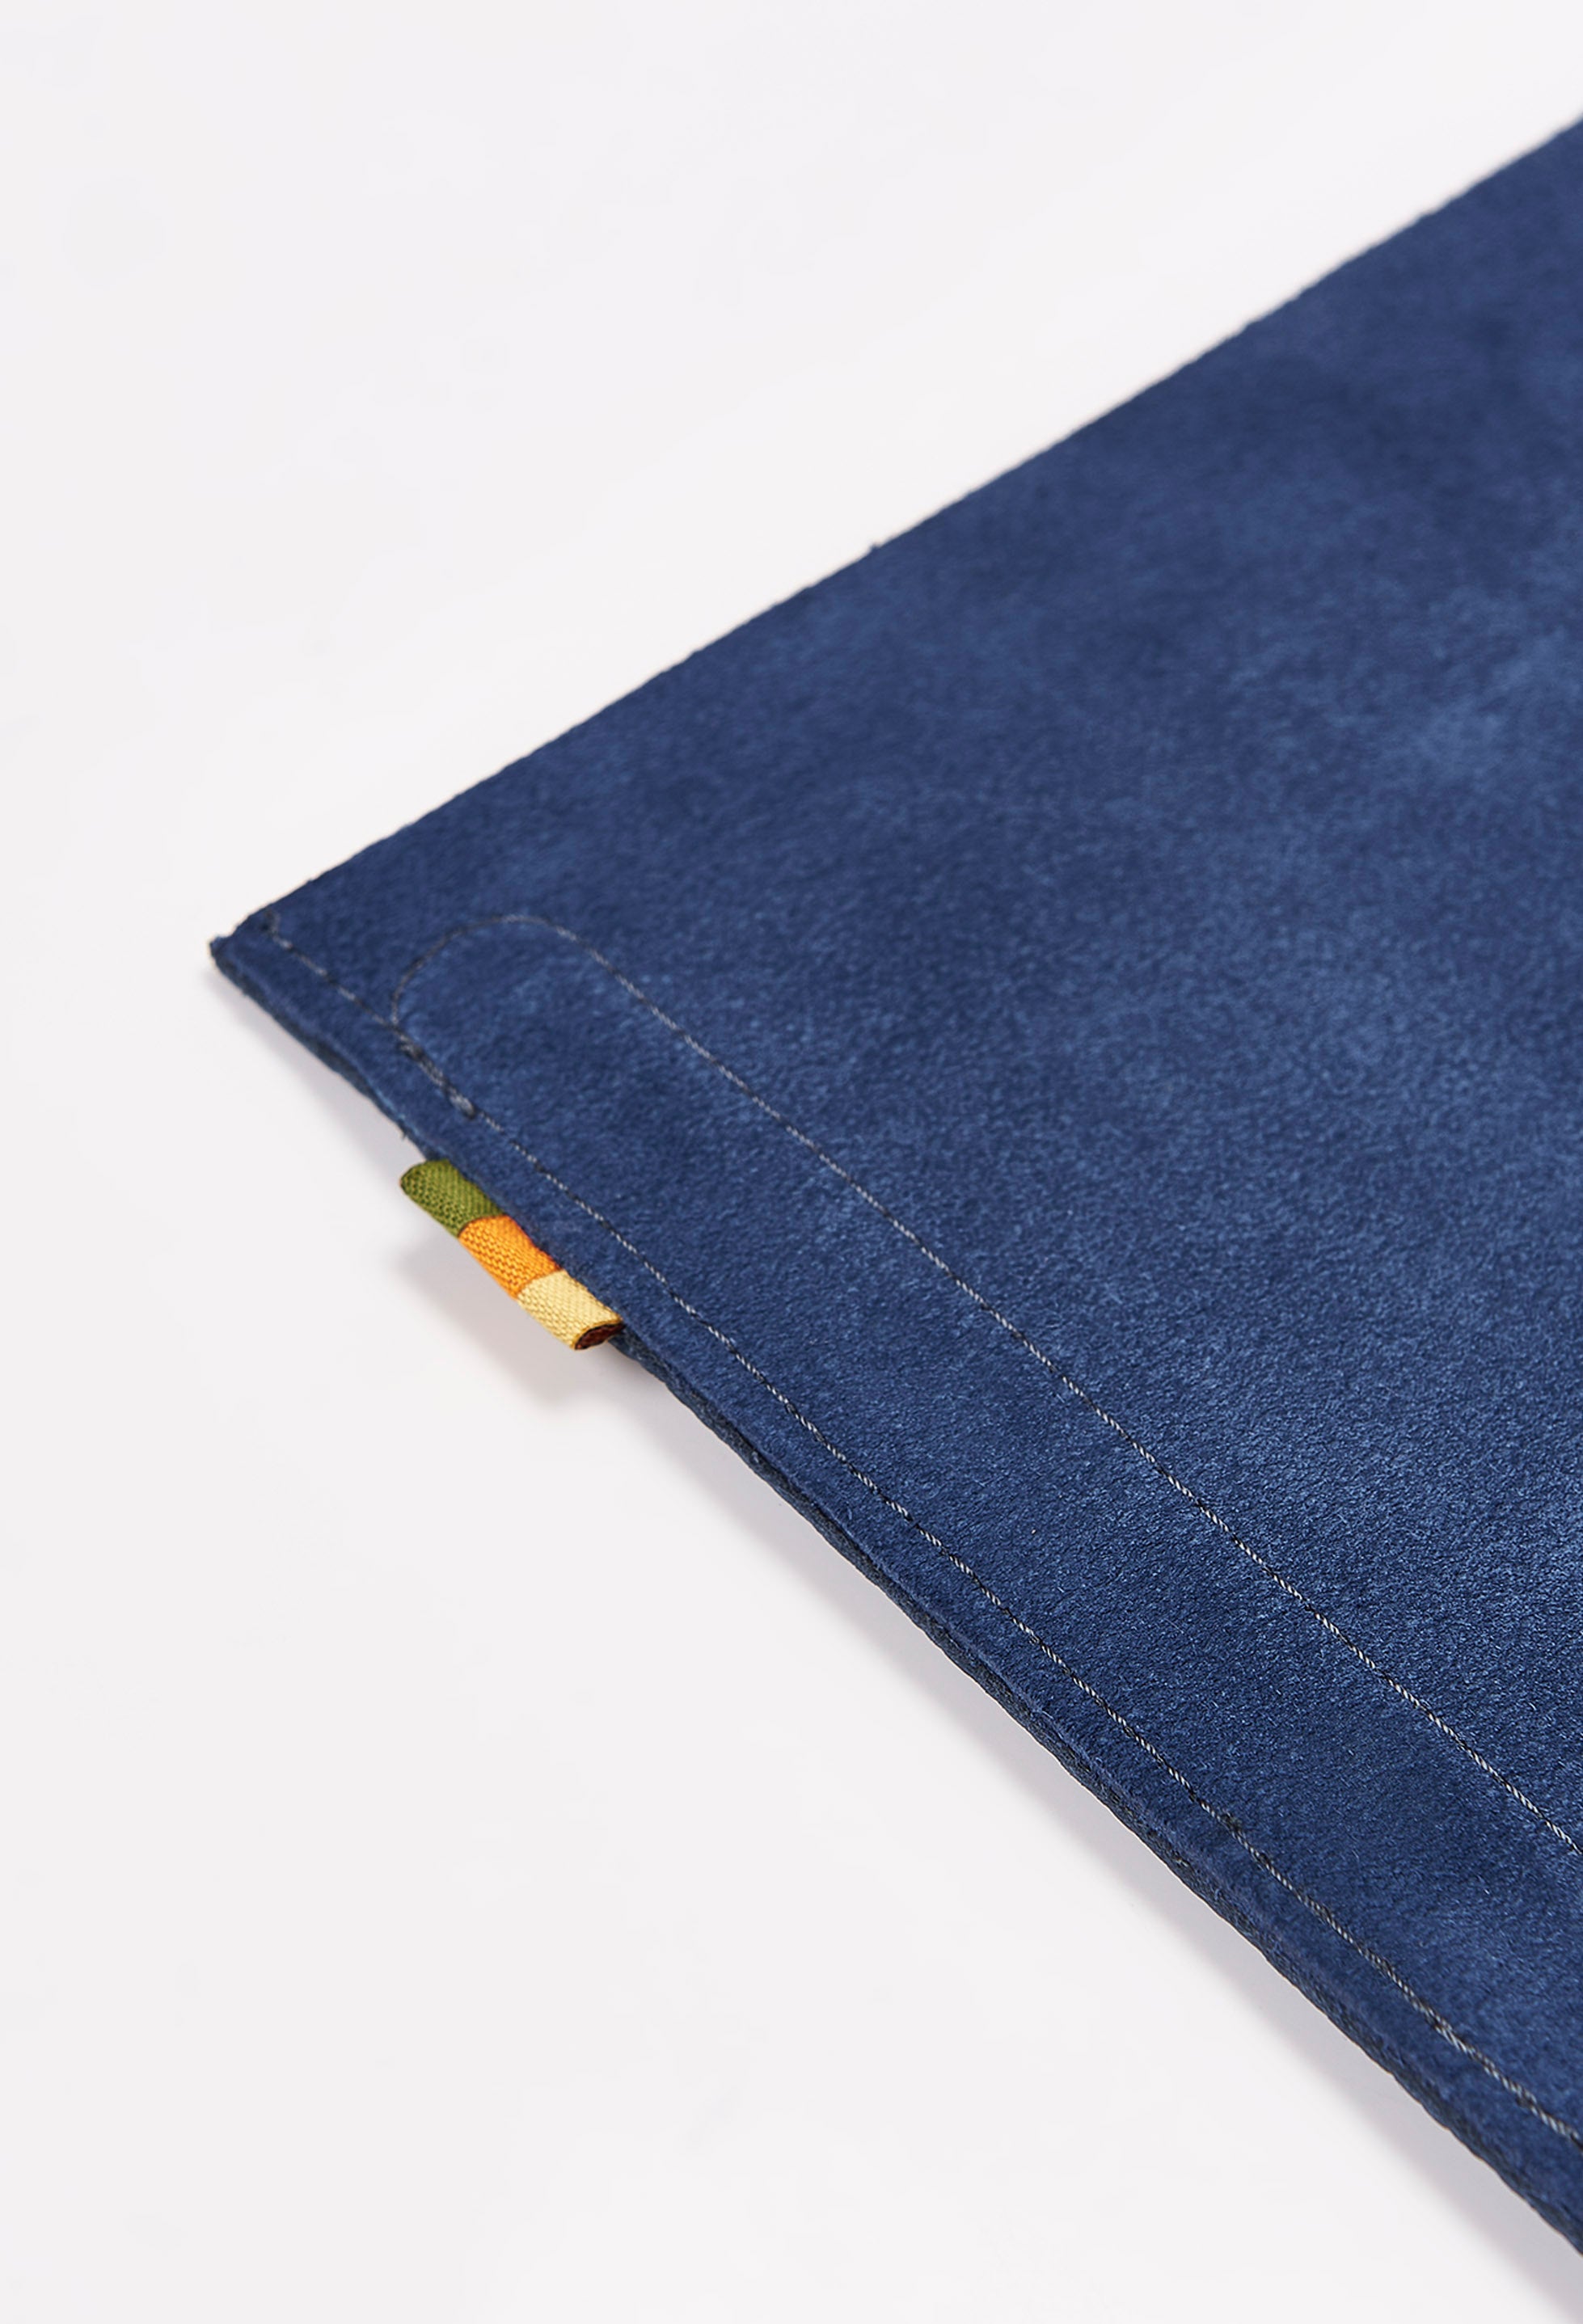 Partial photo of the rear of a blue leather minimalist desk mat made of blue suede leather with our Signature Grosgrain Loop Tab.